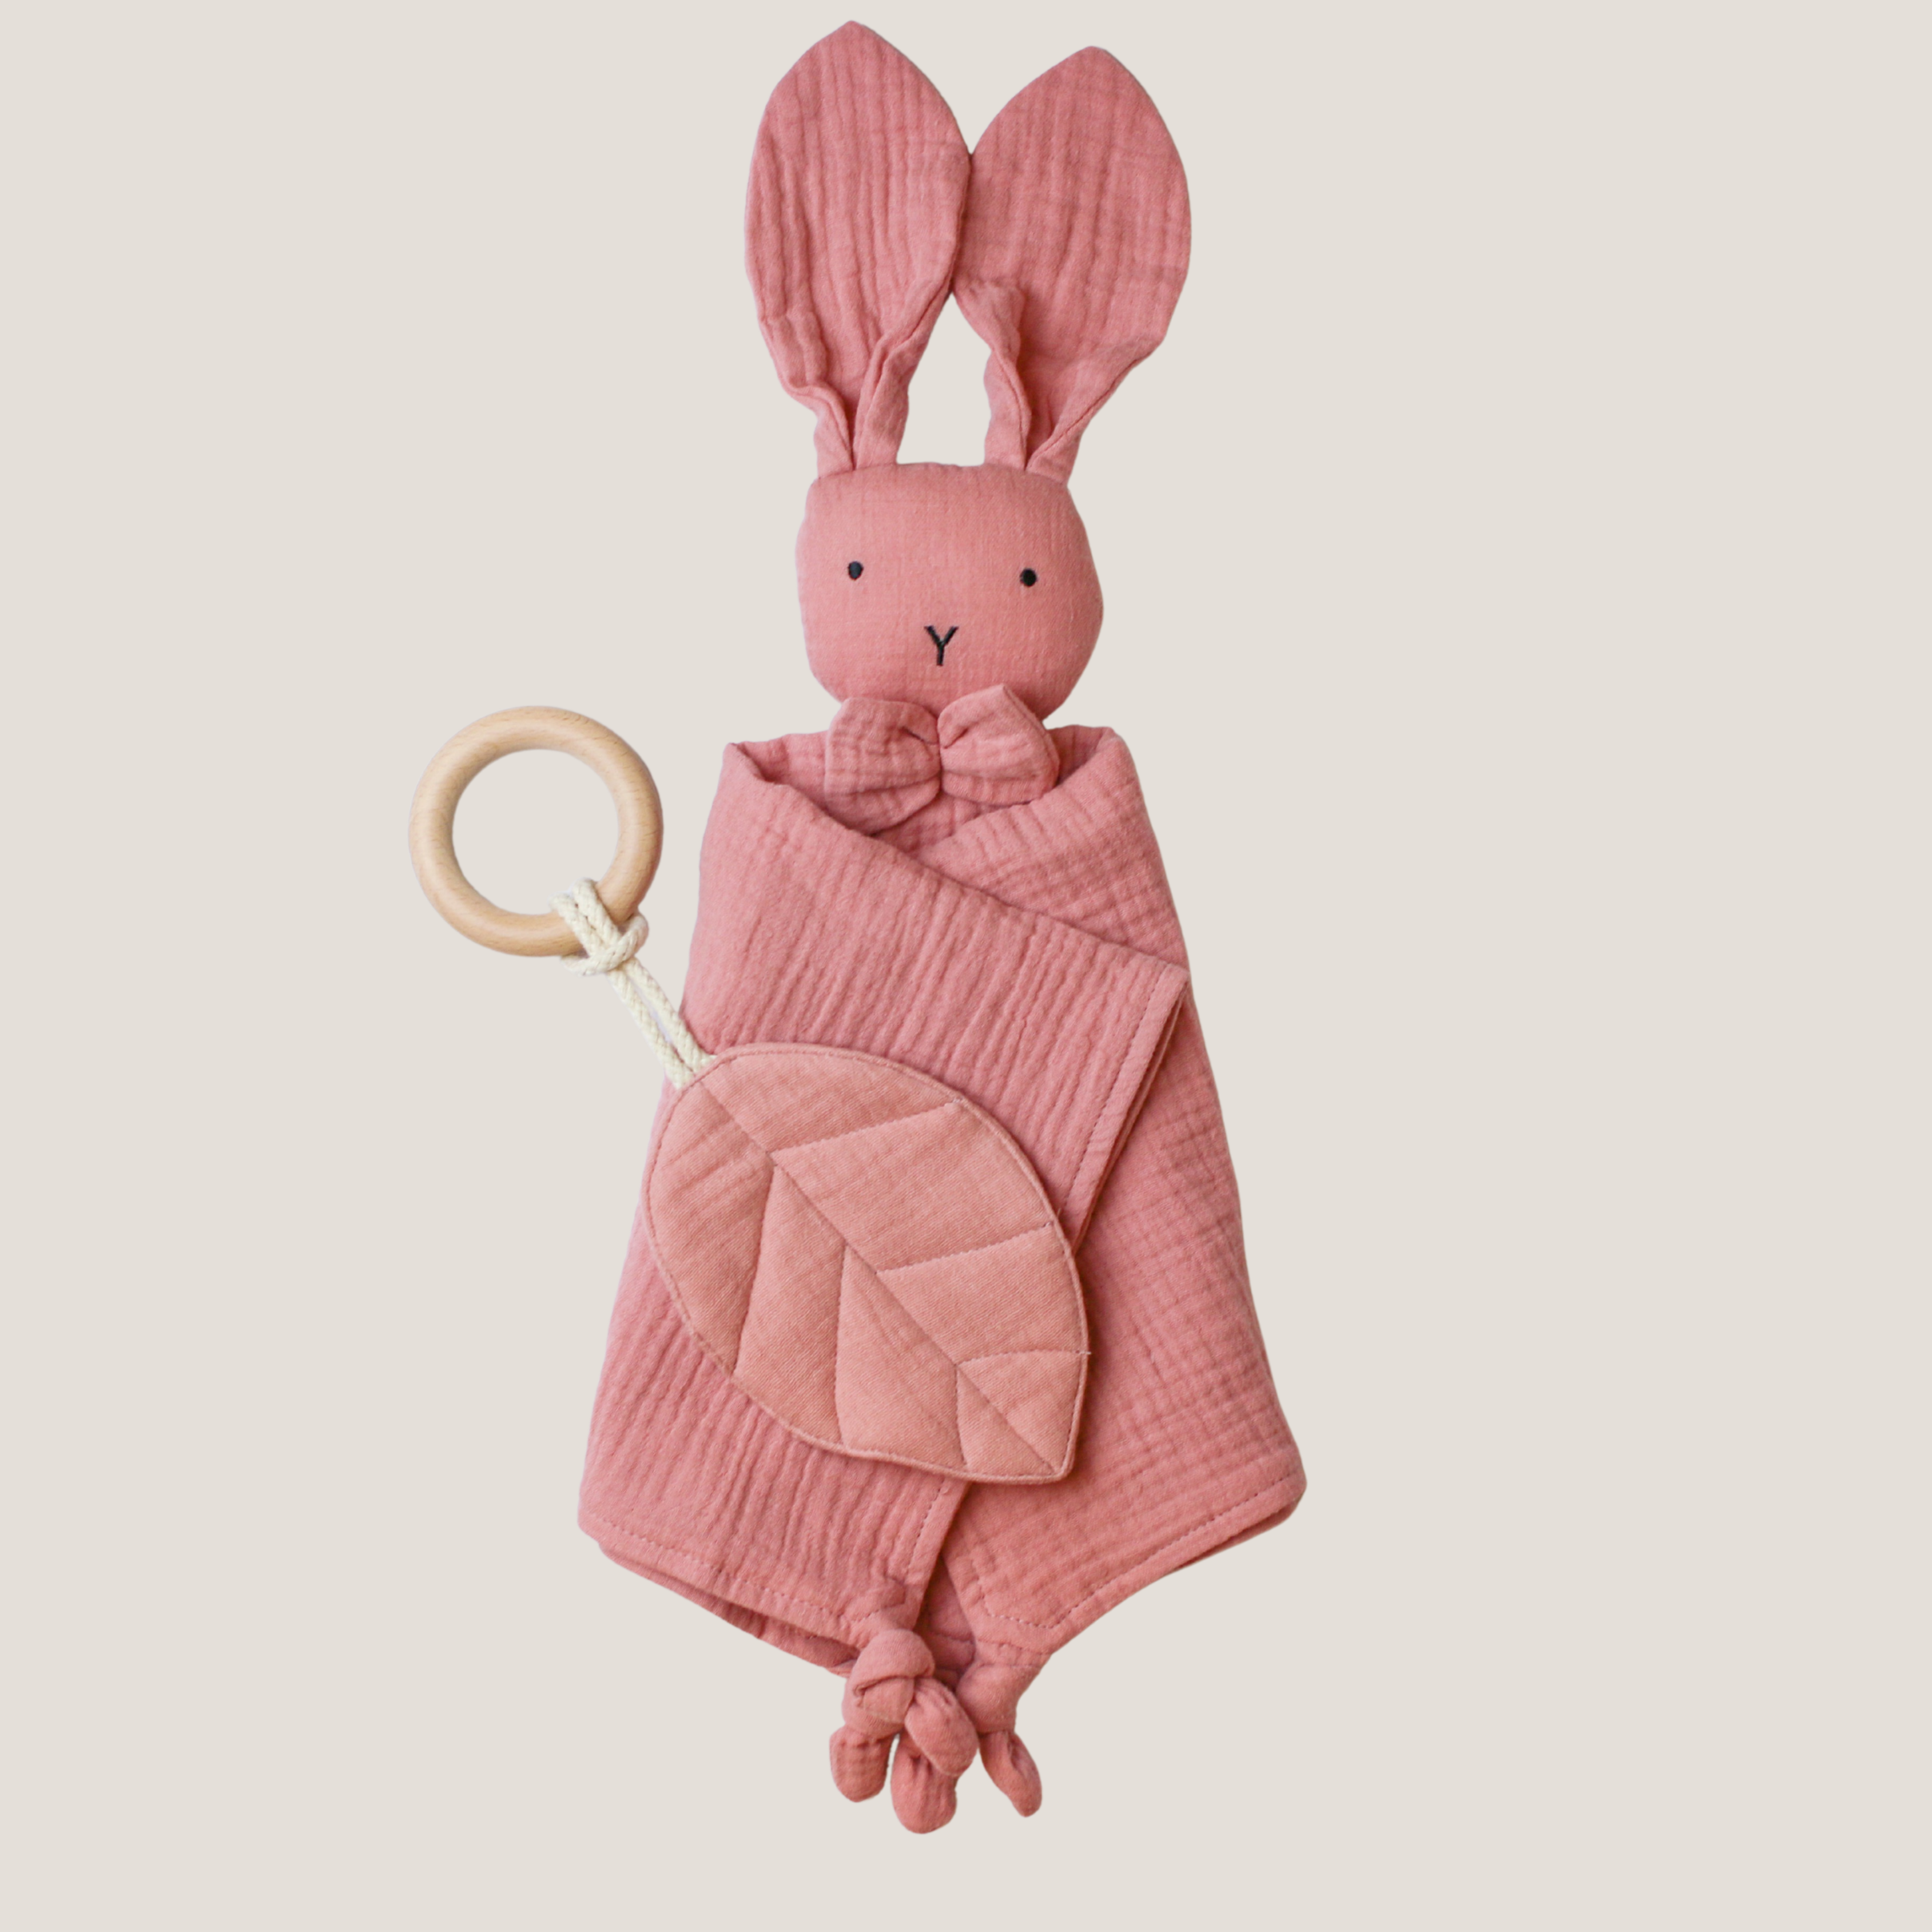 Snuggly Bunny Comforter & Ring Leaf Teether Bundle in Dusty Pink